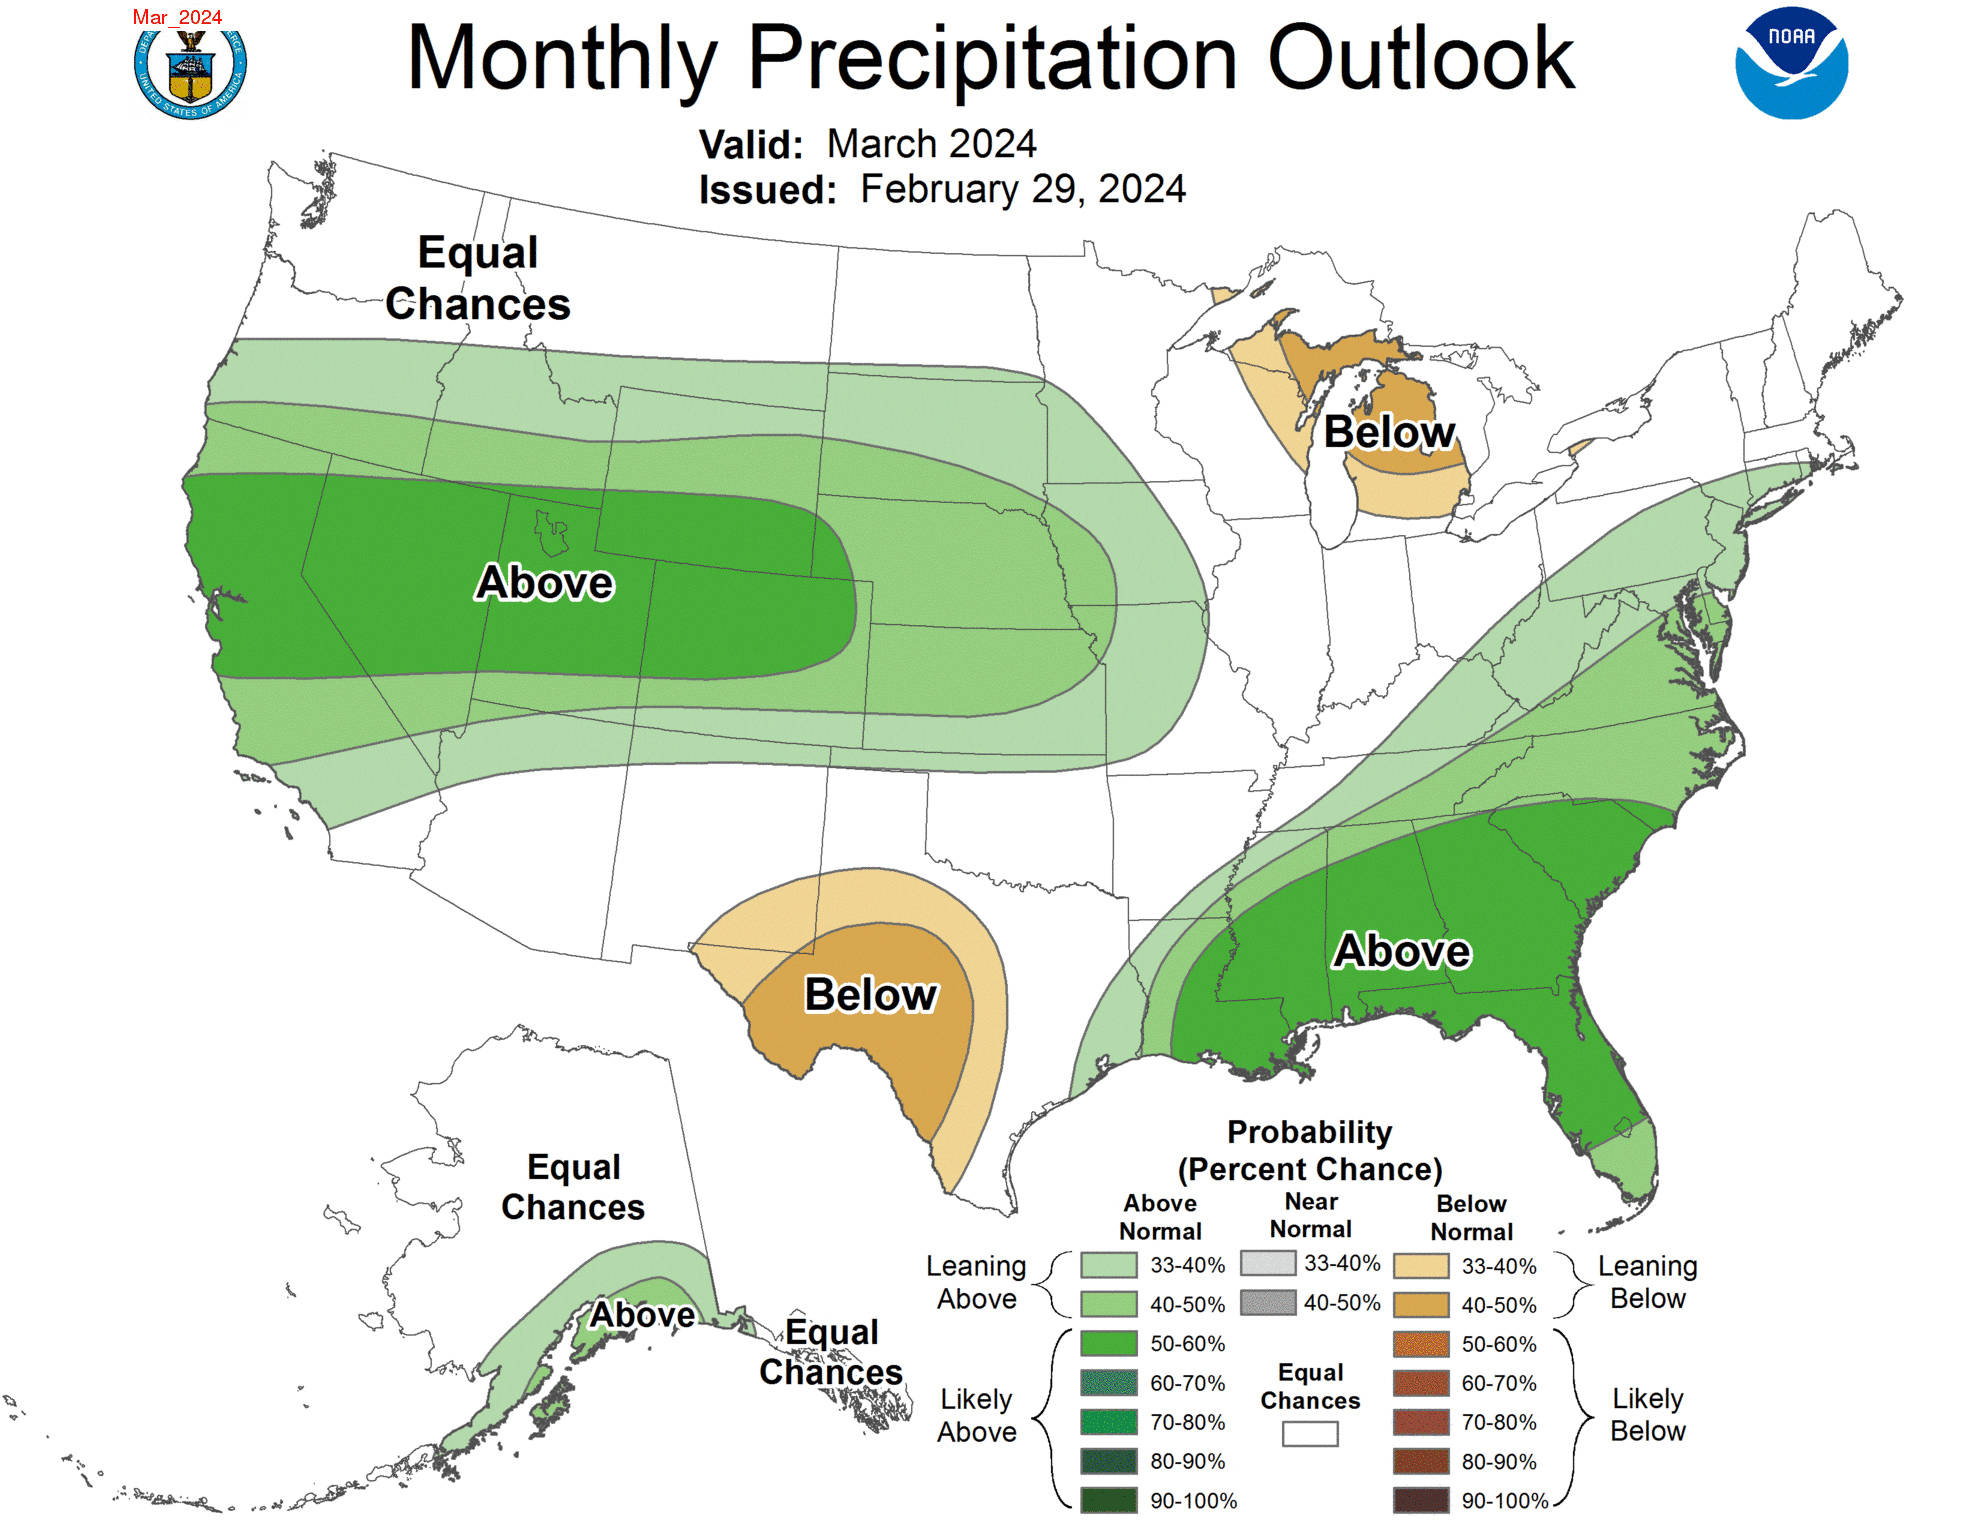 The U.S. precipitation outlook for March 2024. Map by NOAA Climate.gov, based on data from the Climate Prediction Center. From: https://www.climate.gov/news-features/understanding-climate/us-climate-outlook-march-2024 